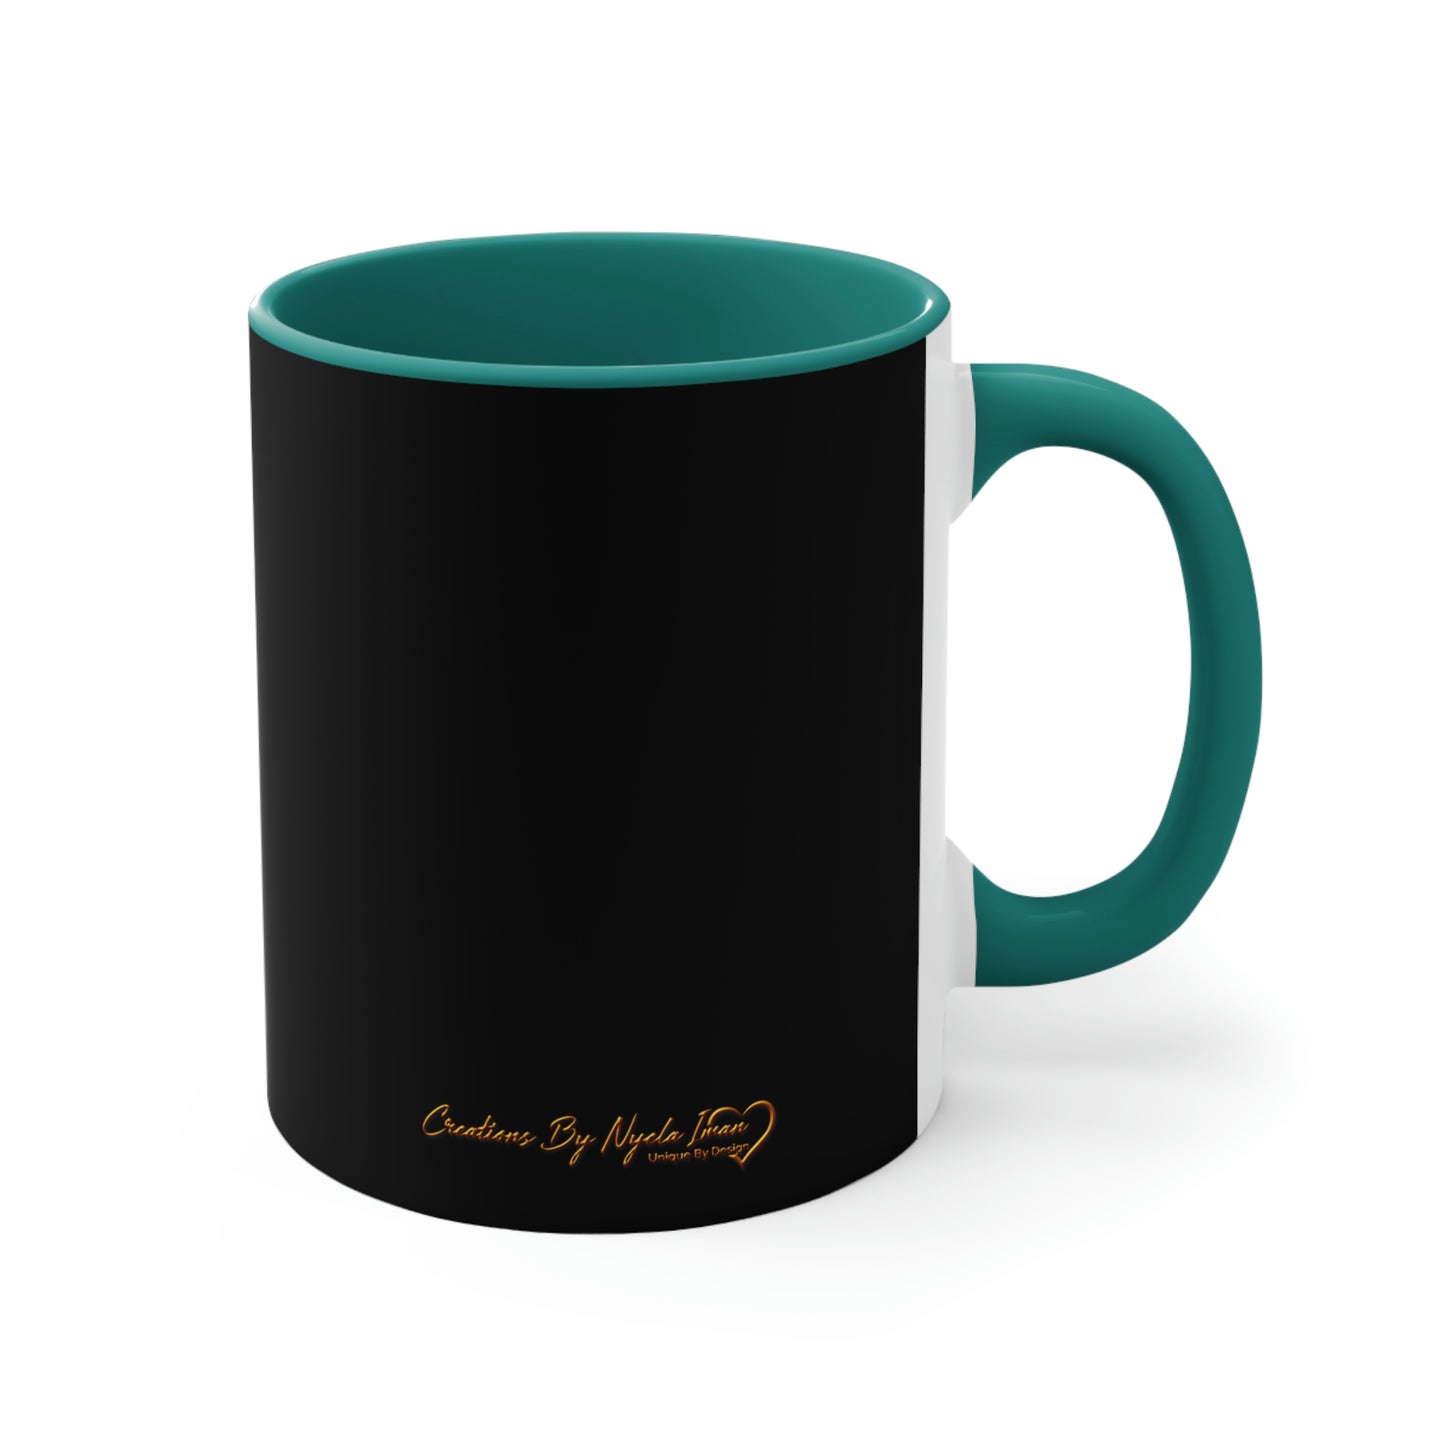 11oz Accent Mug- In His Palm